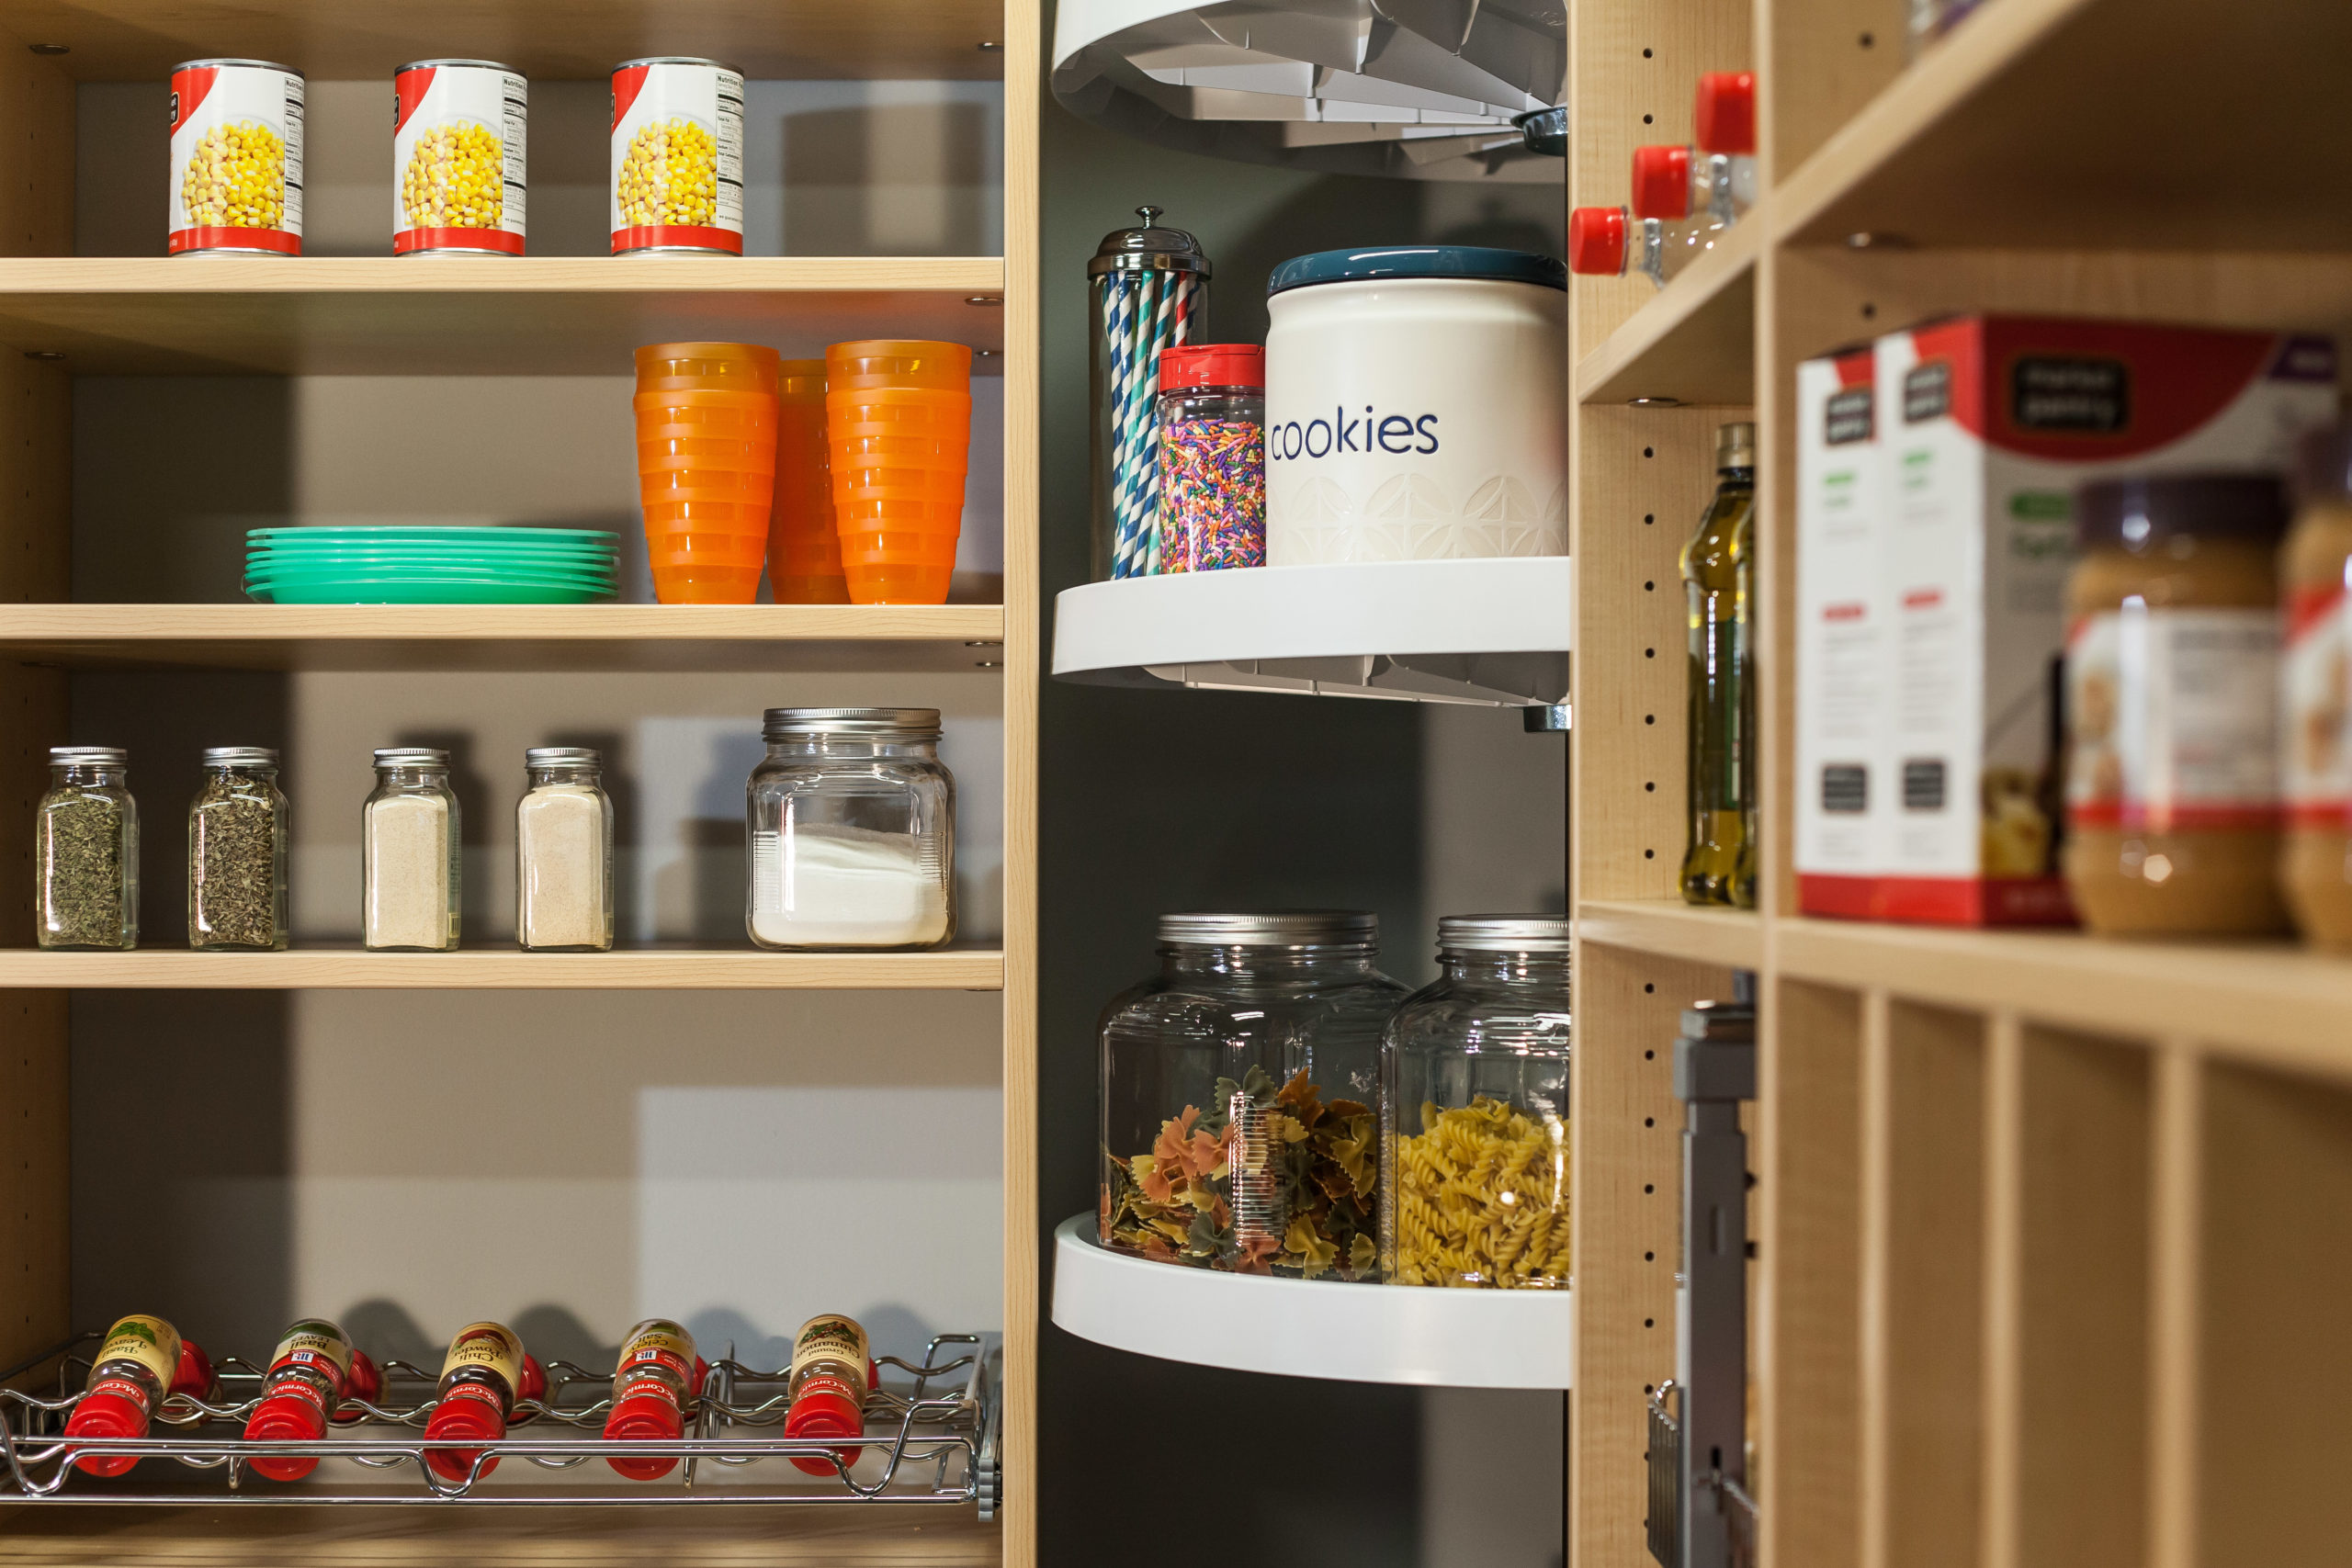 Turned a pantry organizer into storage for the utility closet. Fits al, pantry organization